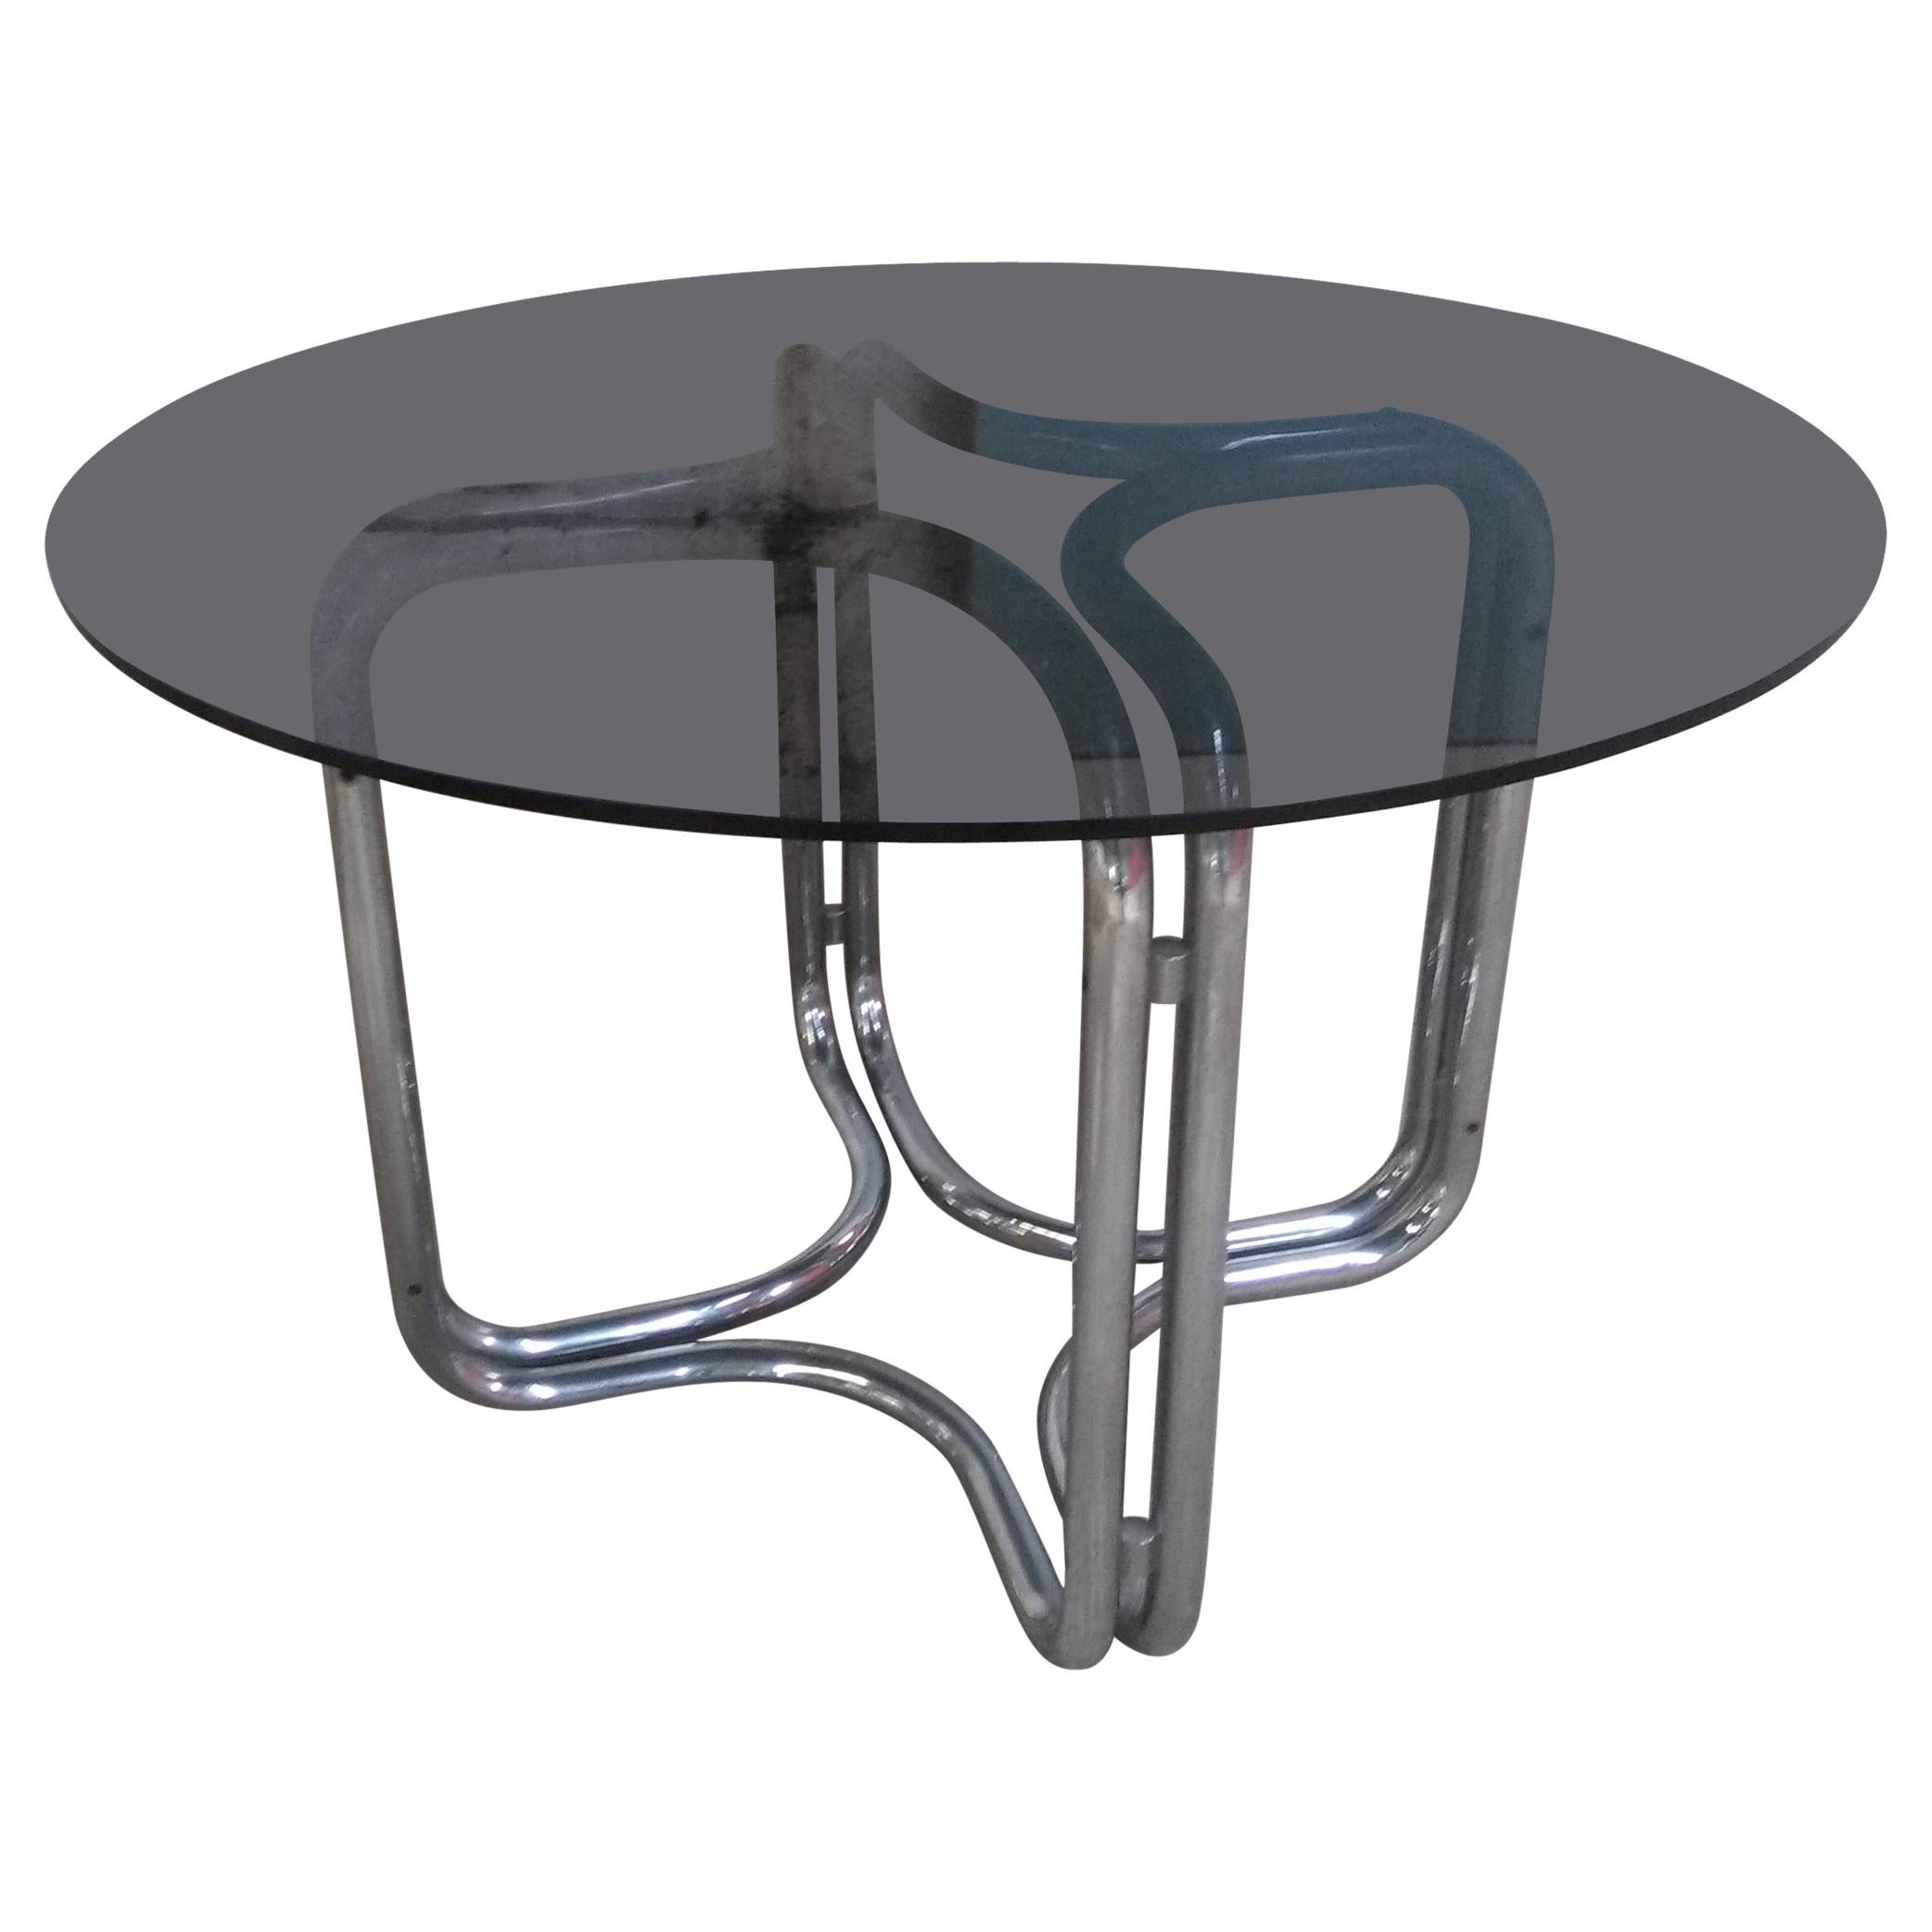 Mid-Century Modern Italian Dining or Centre Table by Giotto Stoppino, 1970s